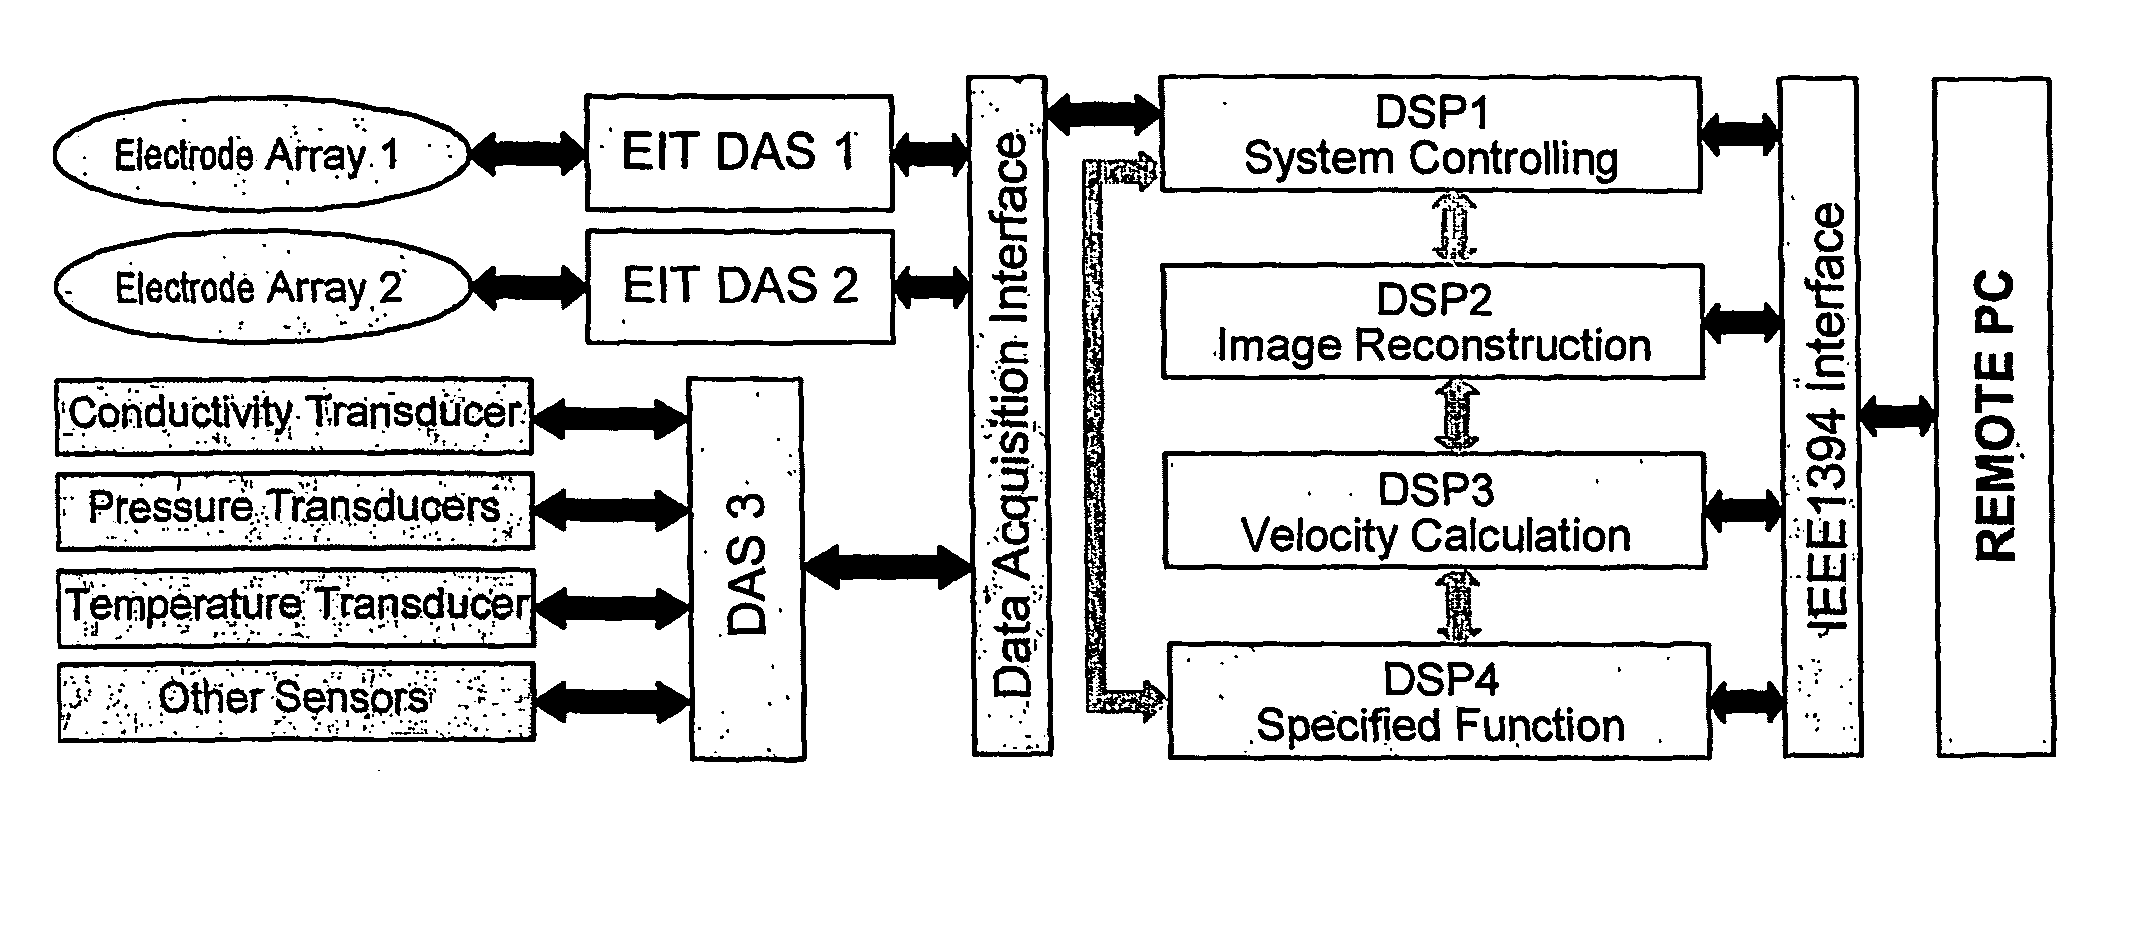 Eit data processing system and method